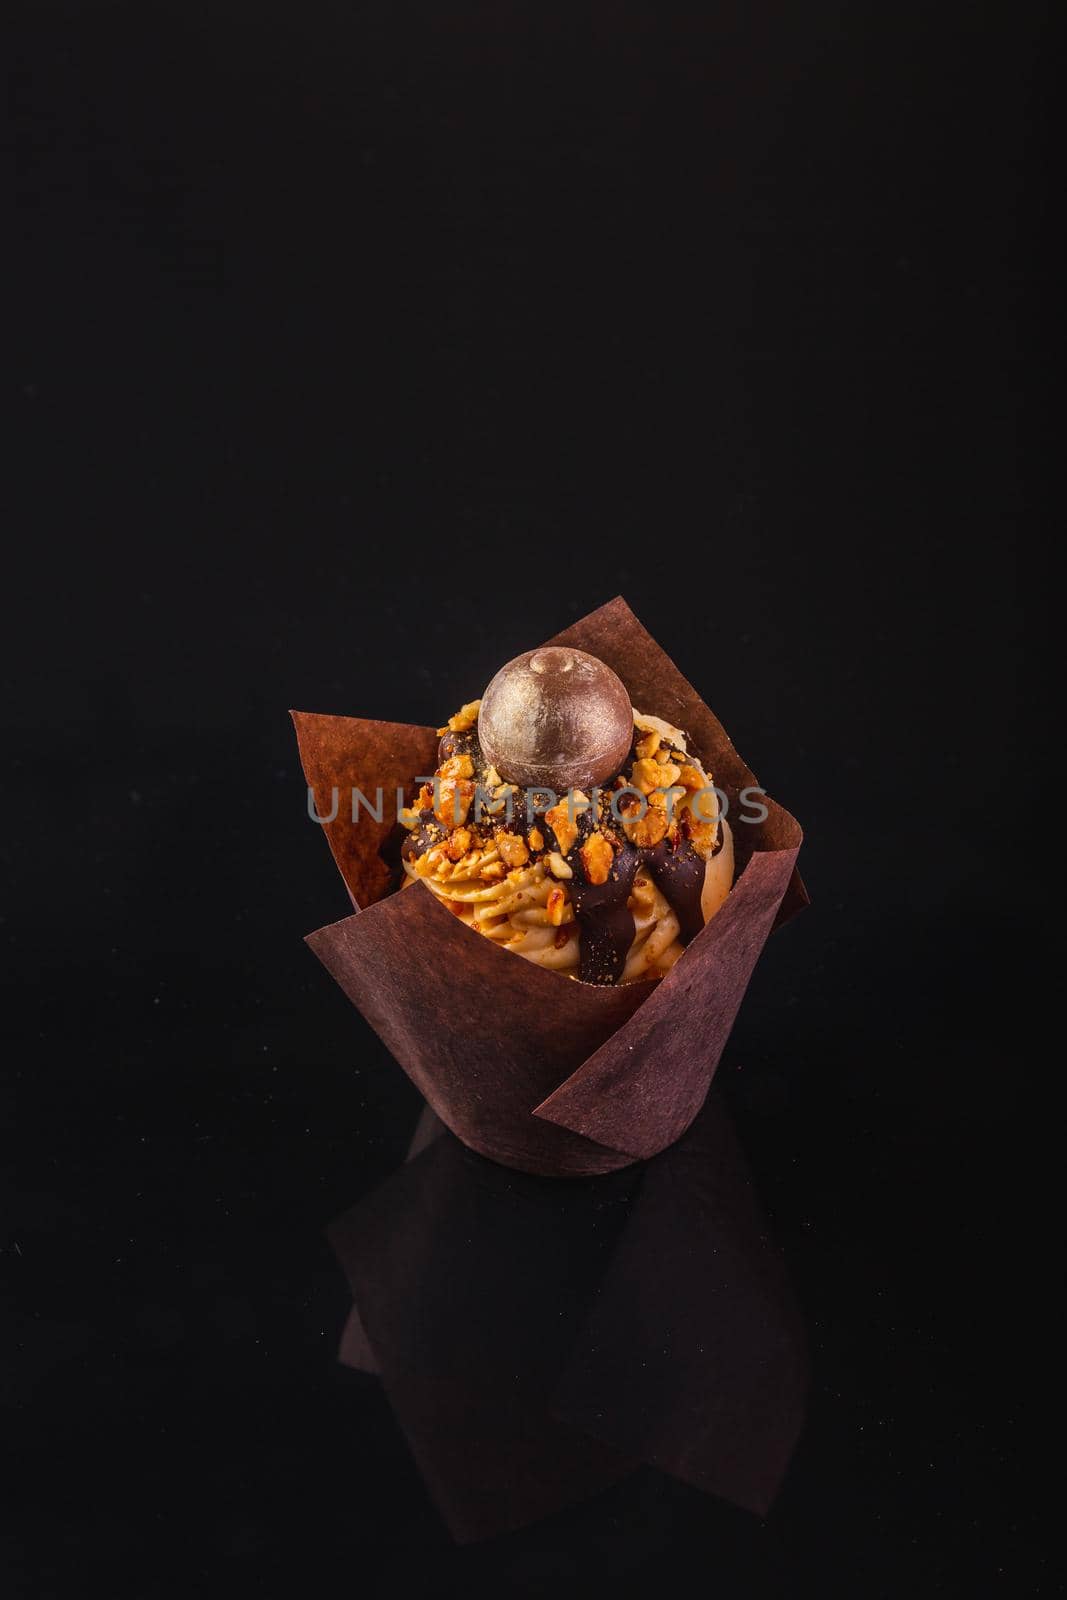 Peanut Butter Cupcake On A Black Background With Reflection.